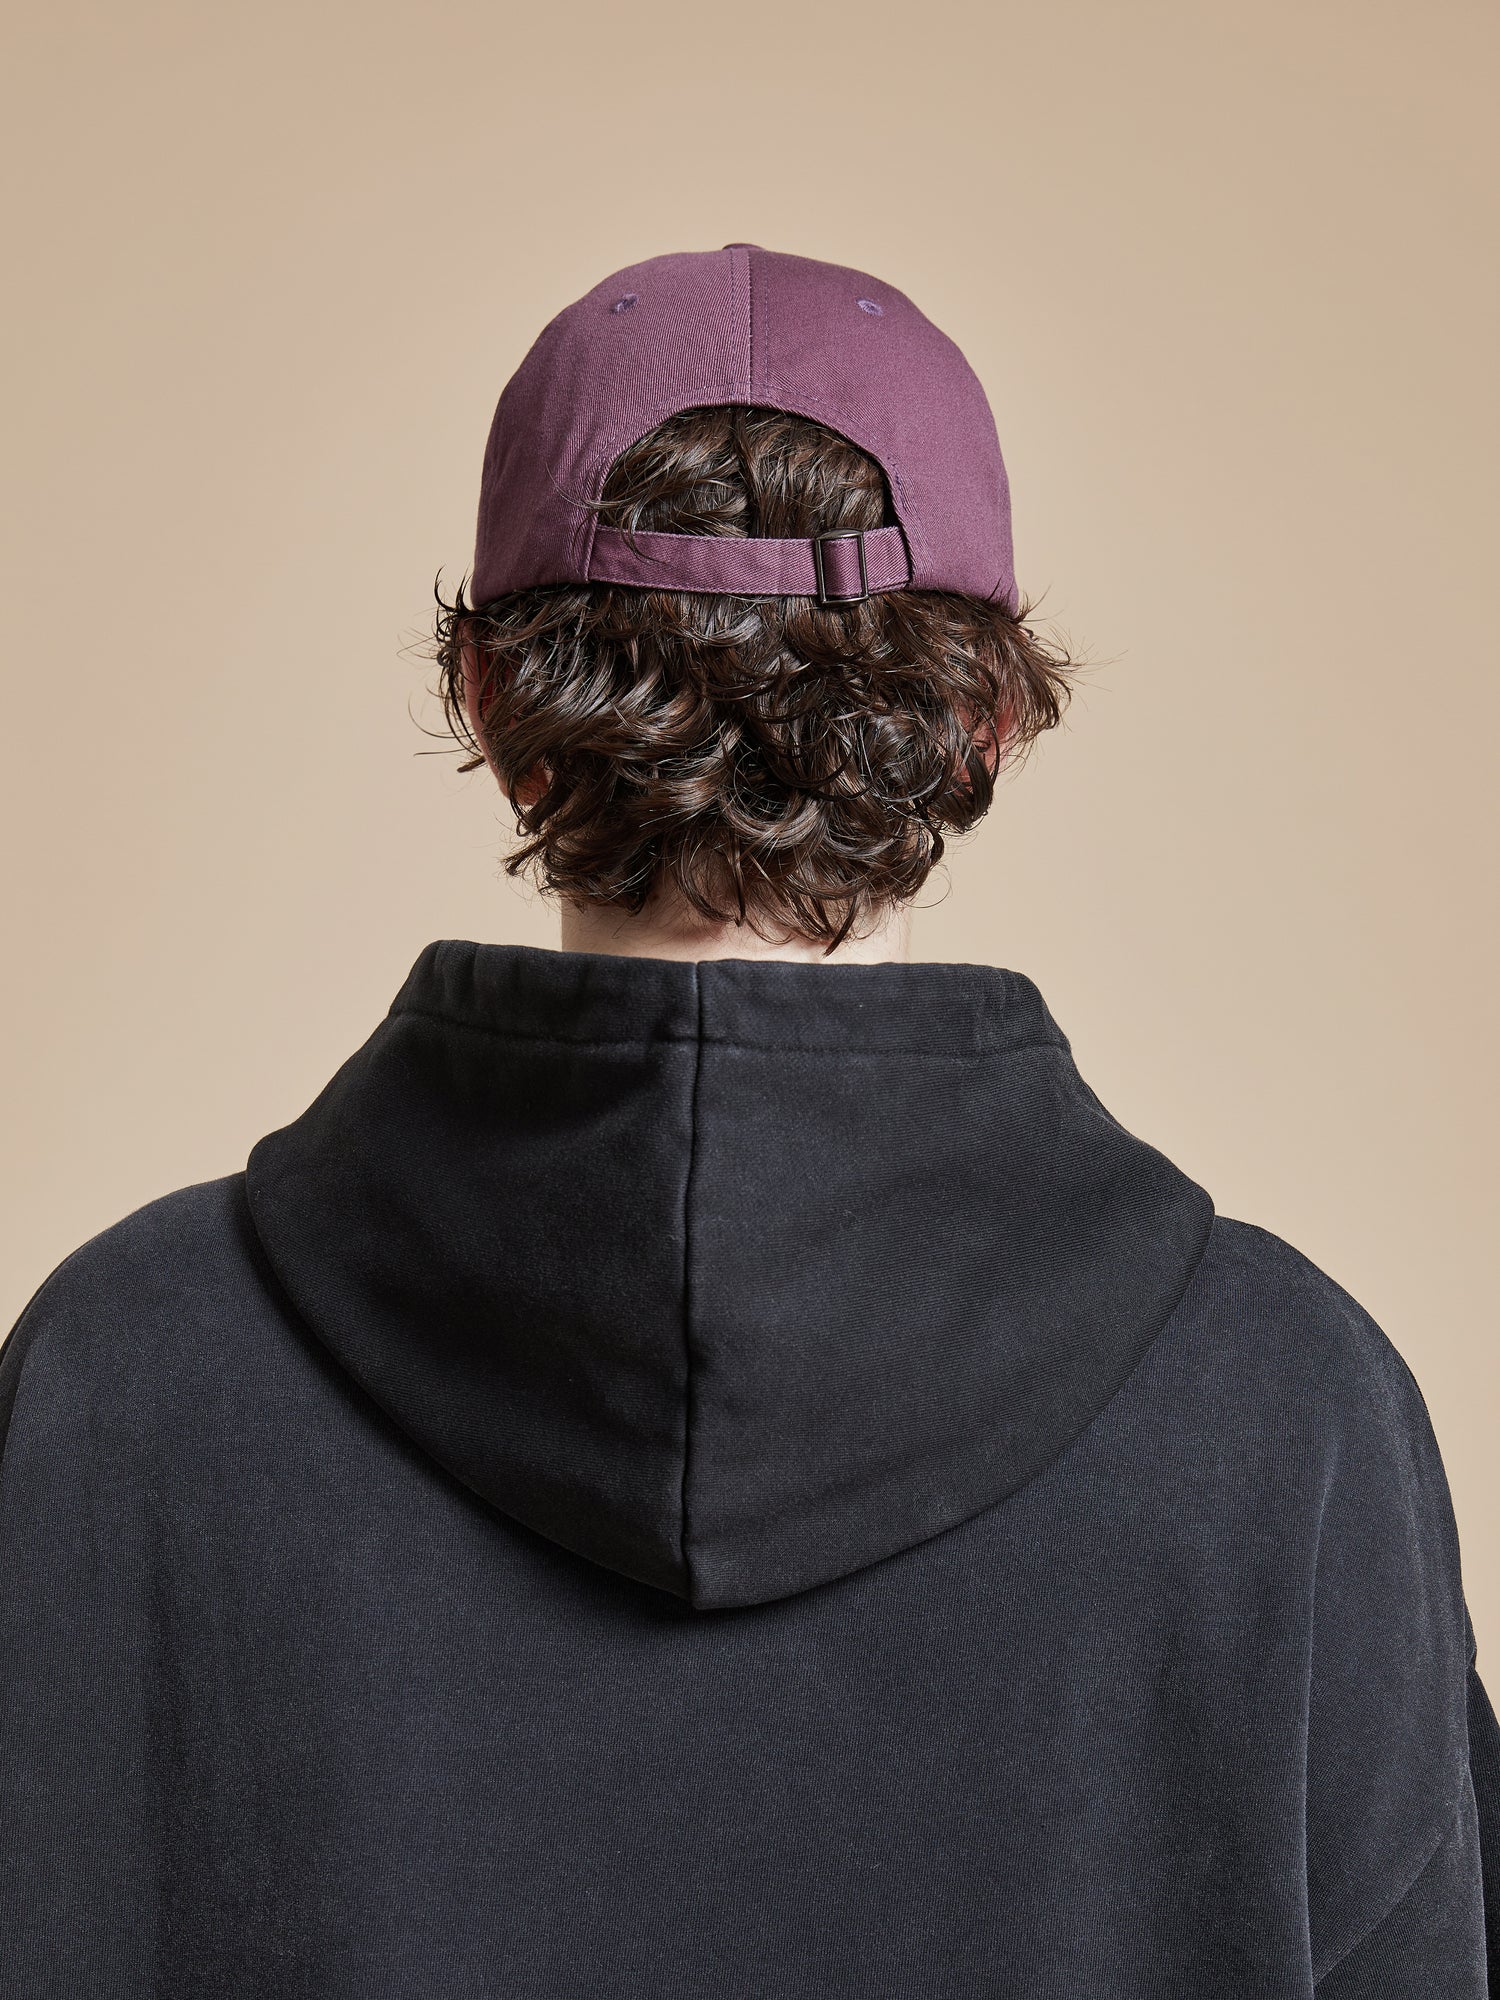 The back view of a man wearing a Found Flower Deer Cap.